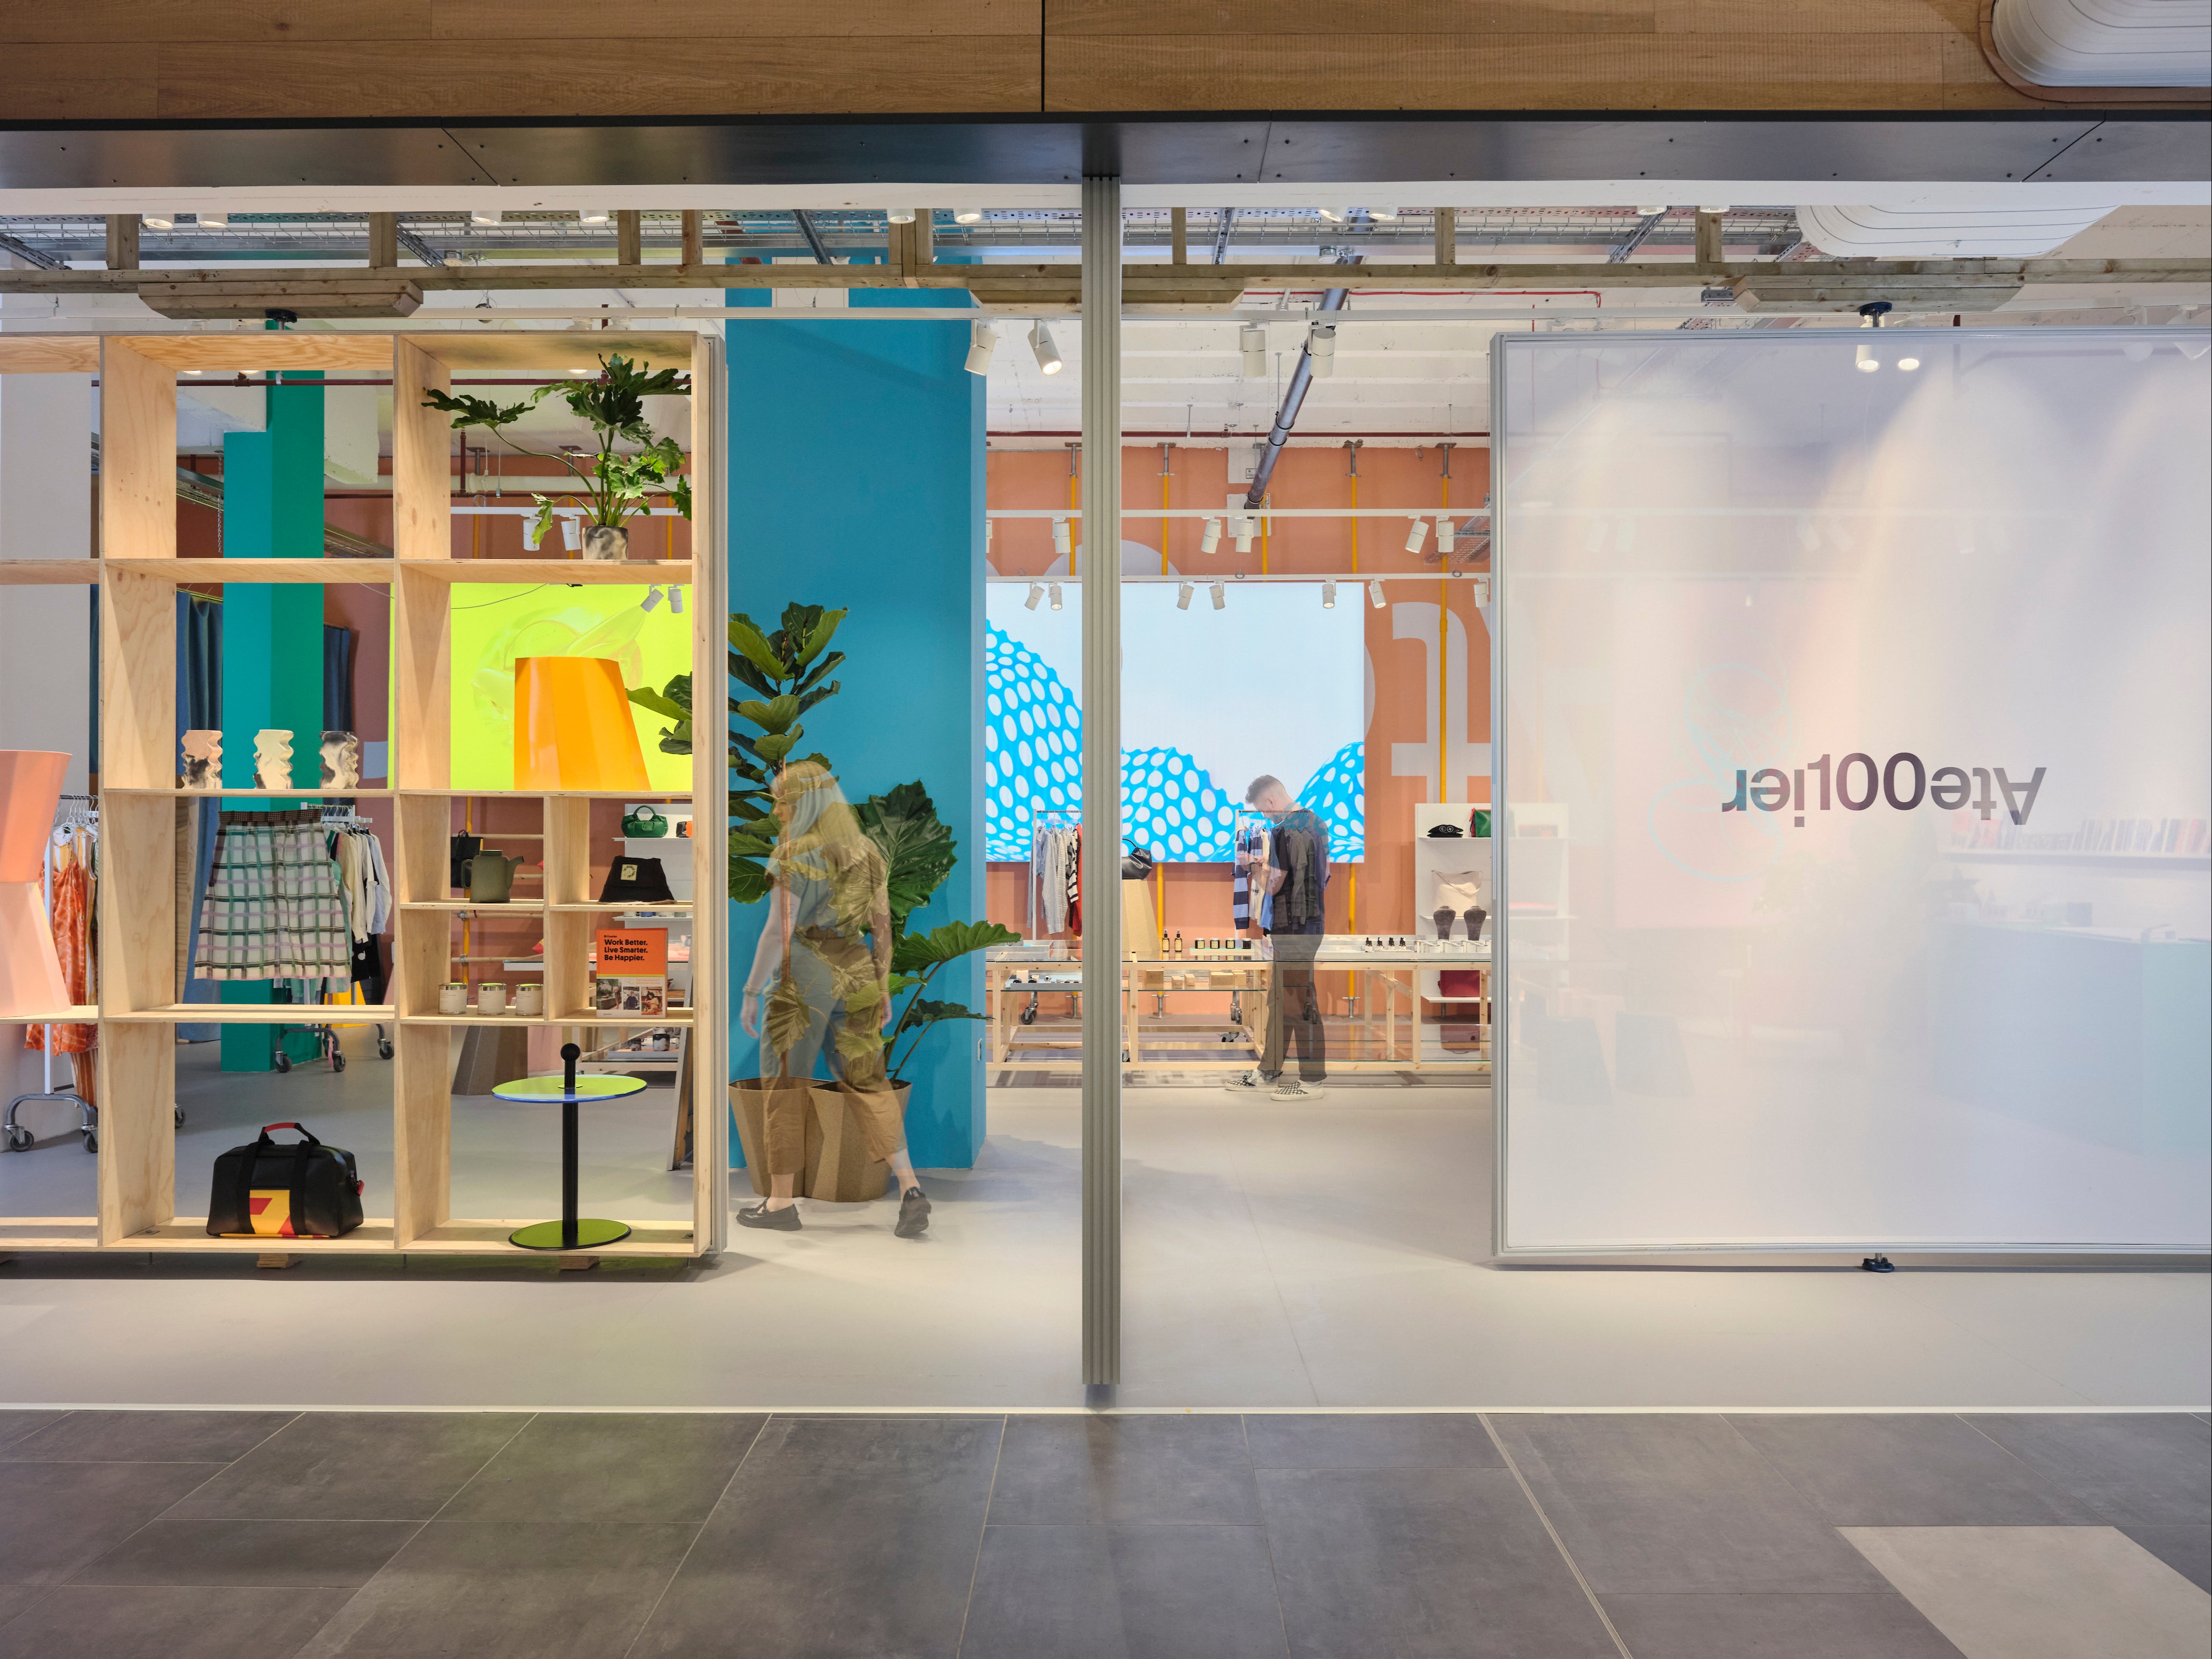 Atelier100, a new creative space and programme launched by H&M and Ikea